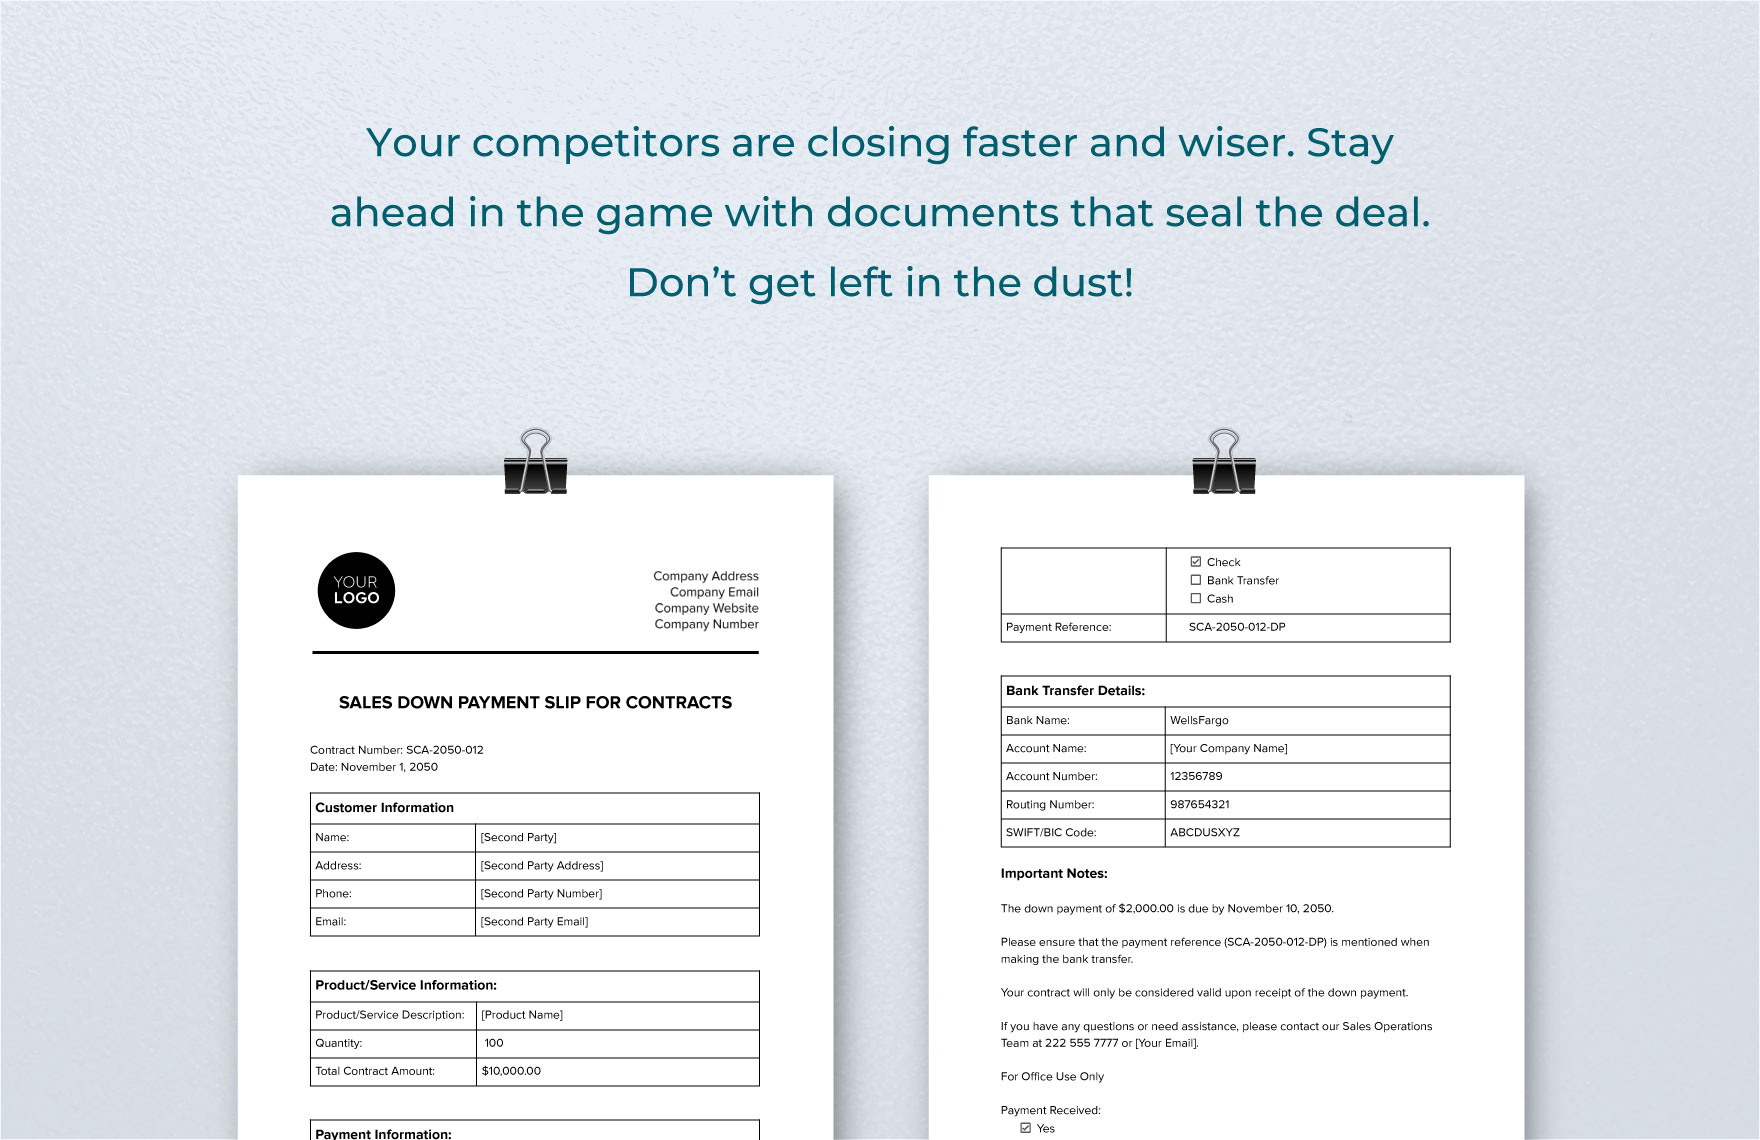 Sales Down Payment Slip for Contracts Template